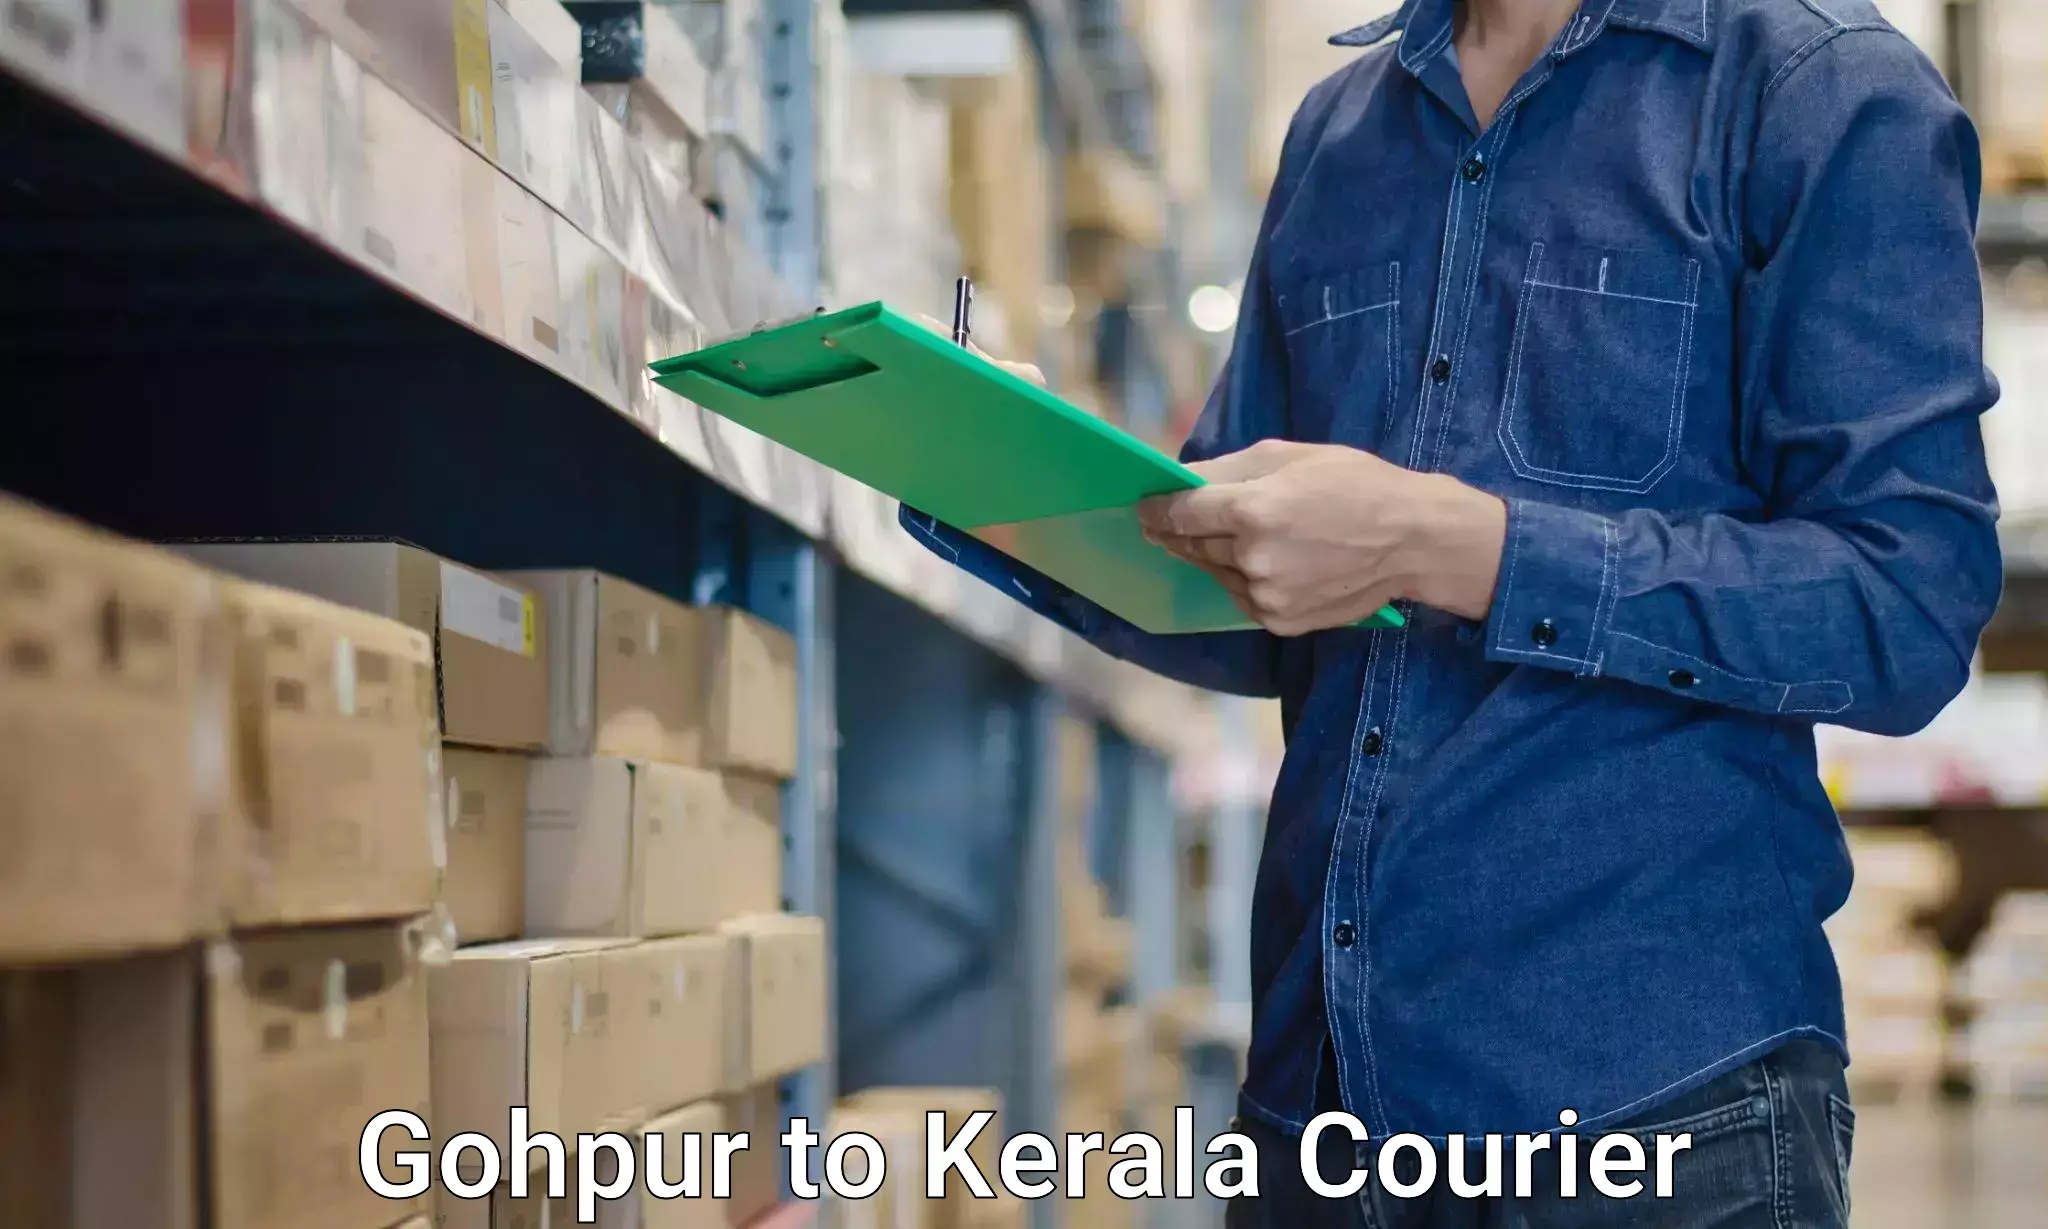 Moving and storage services Gohpur to Kerala